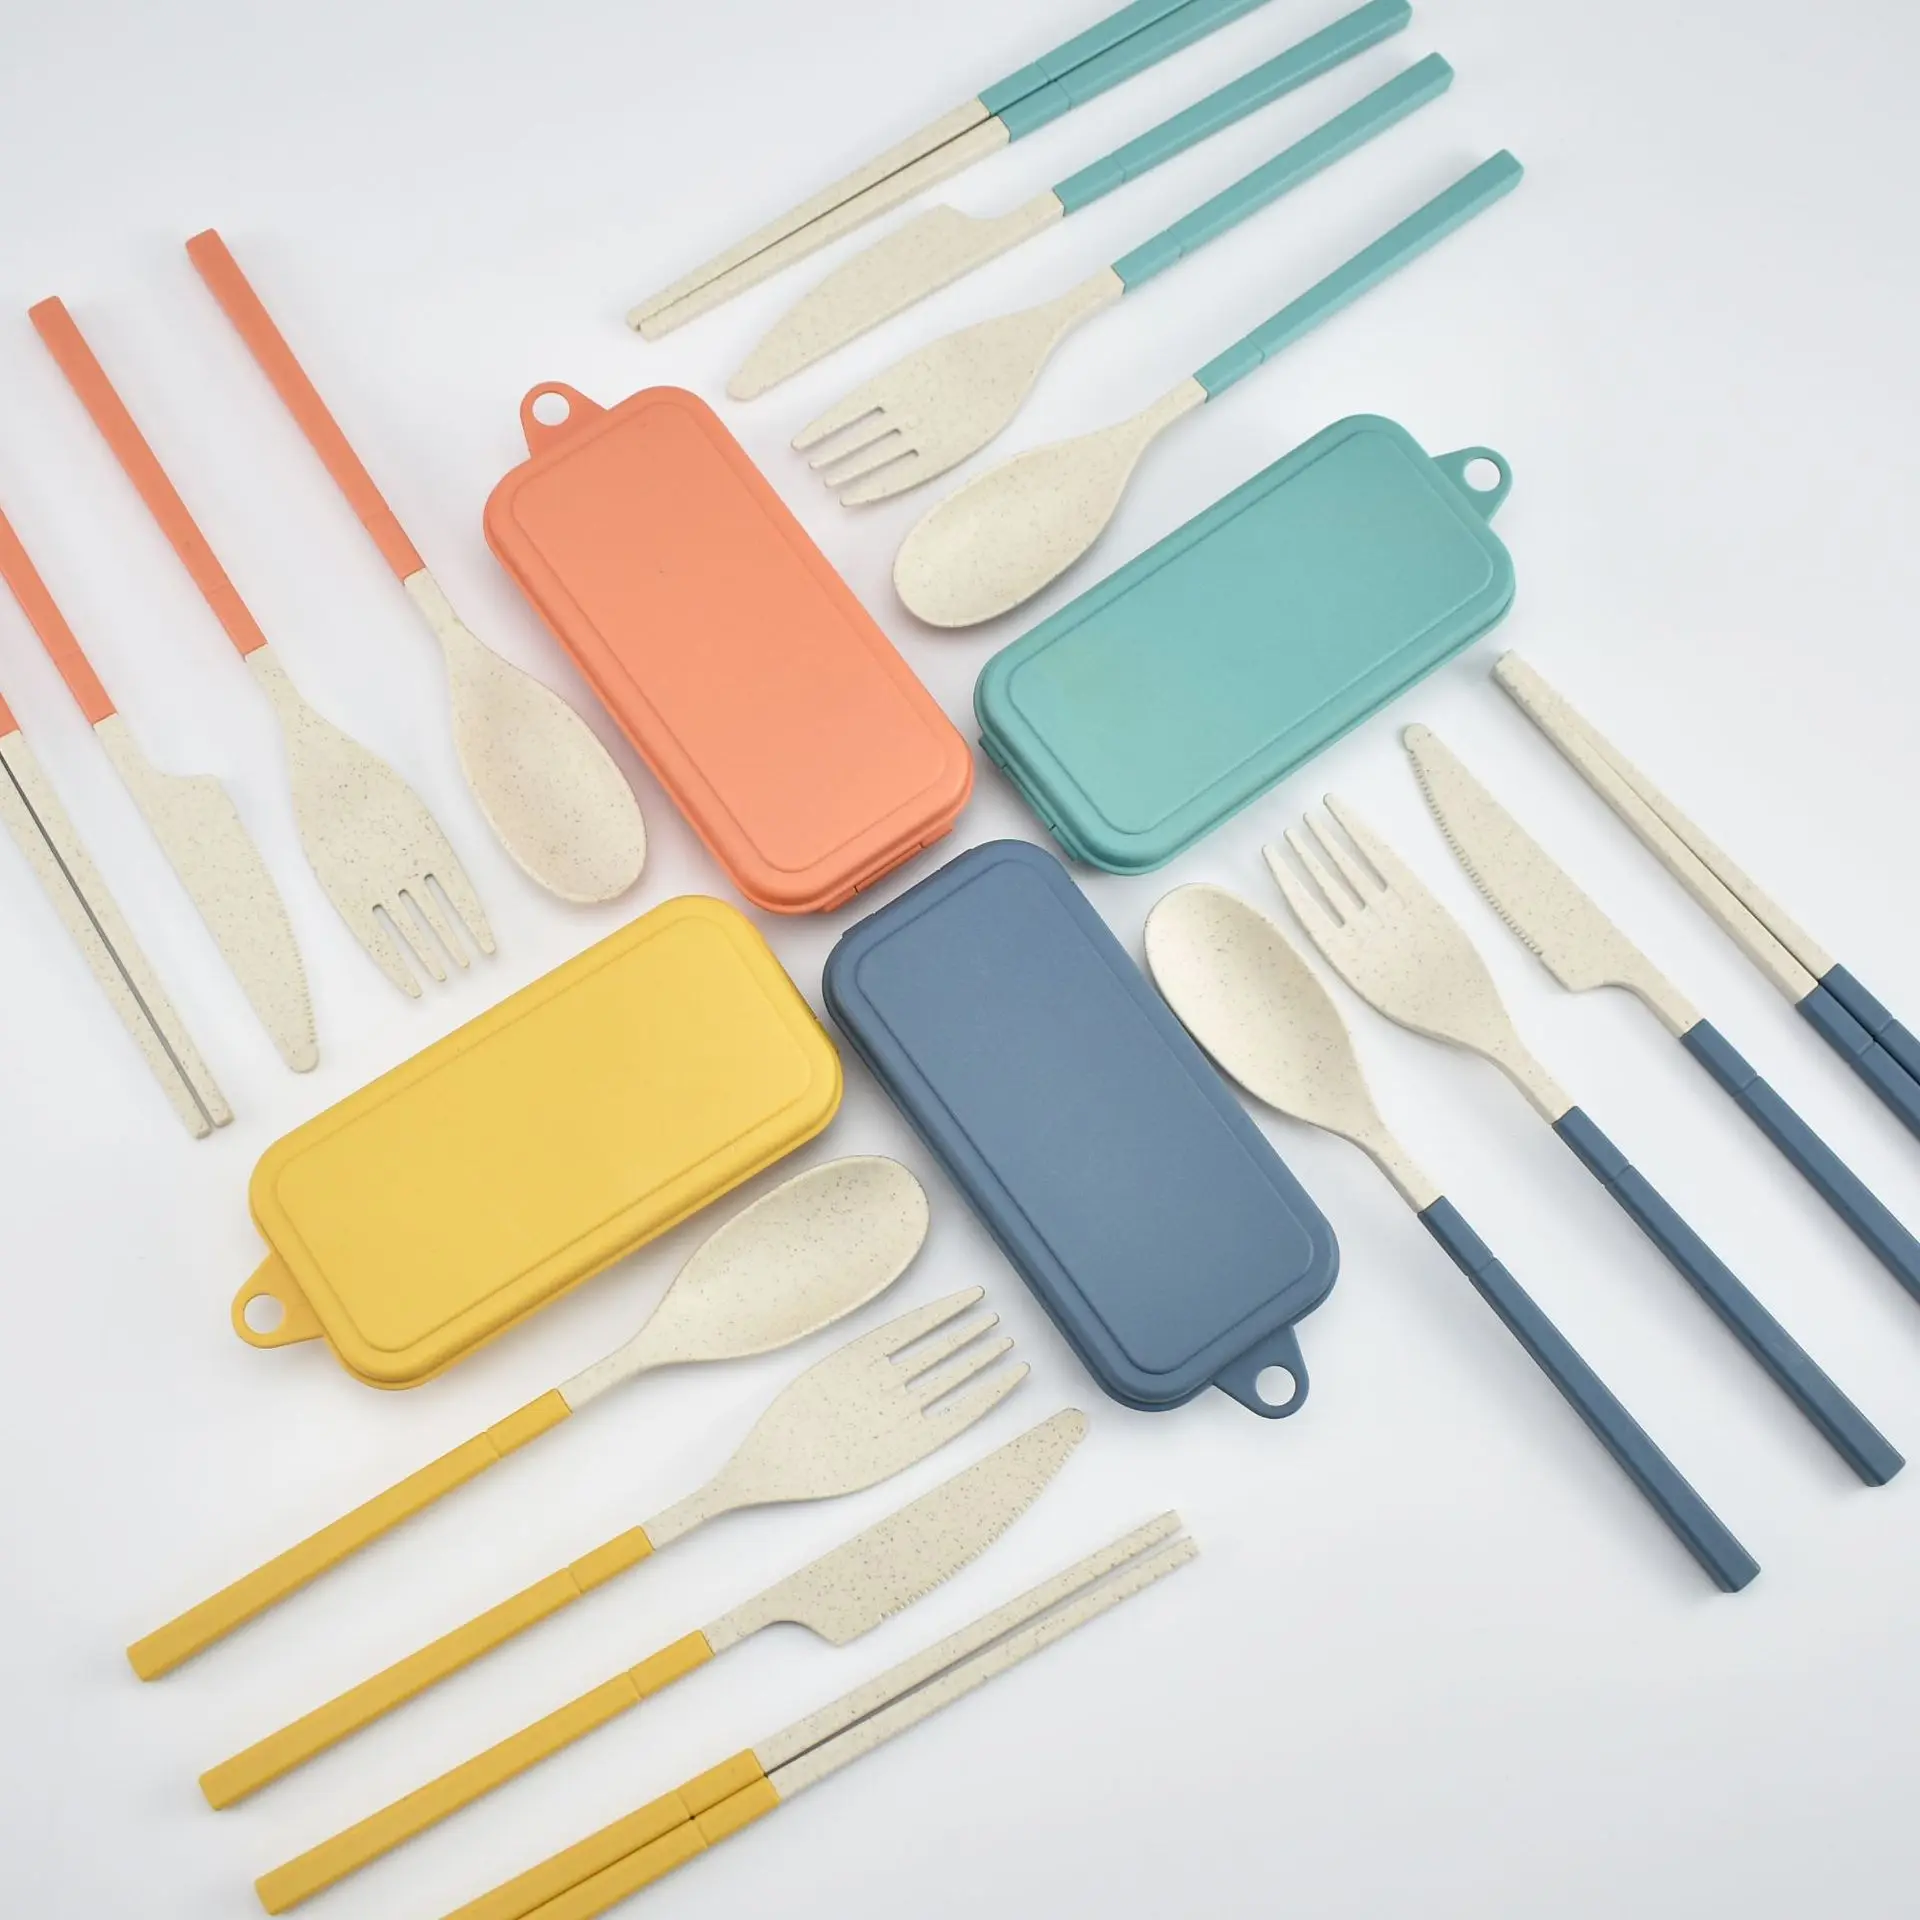 

Portable Detachable 4PCS Spoon Fork Knife Chopsticks Set Reusable Travel Camping Folding Wheat Straw Cutlery with Box, Orange, yellow, green, blue, pink